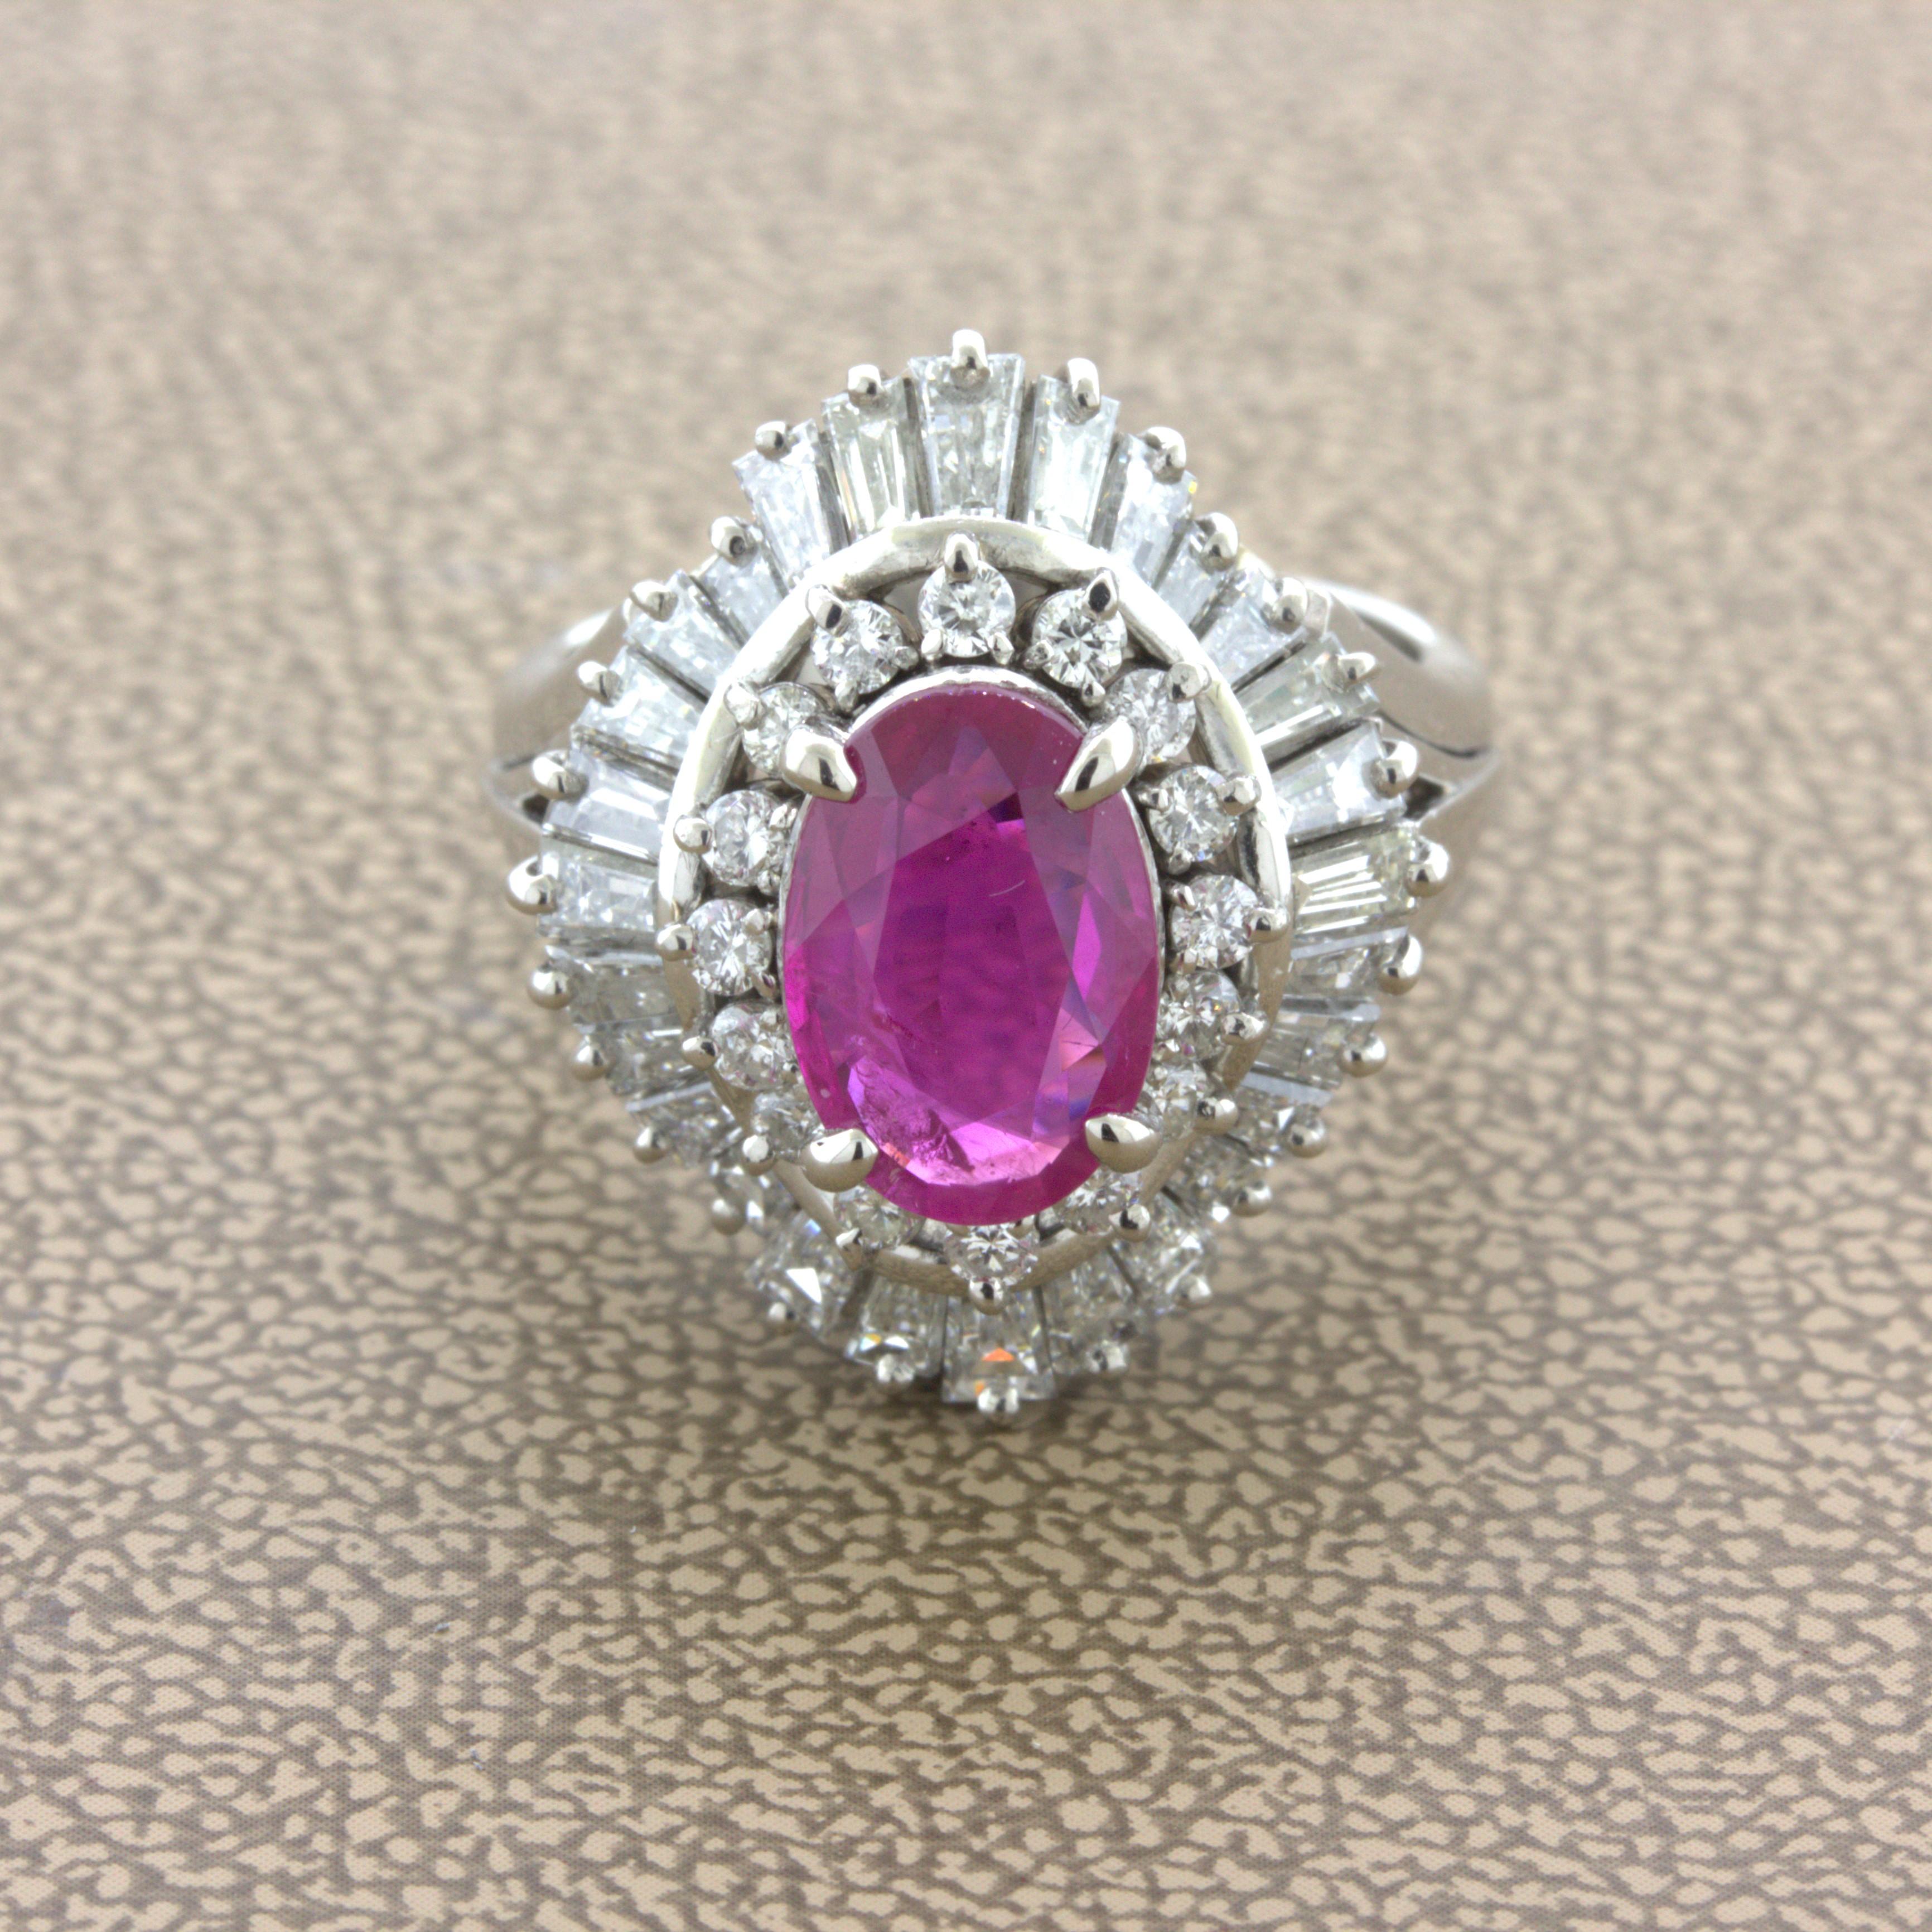 A beautiful and rare unheated oval-shape Burmese ruby takes center stage of this diamond platinum ballerina ring. The ruby weighs 2.31 carats and comes from the famous mines of Mogok in Burma. Burmese rubies are famed for their strong and vibrant